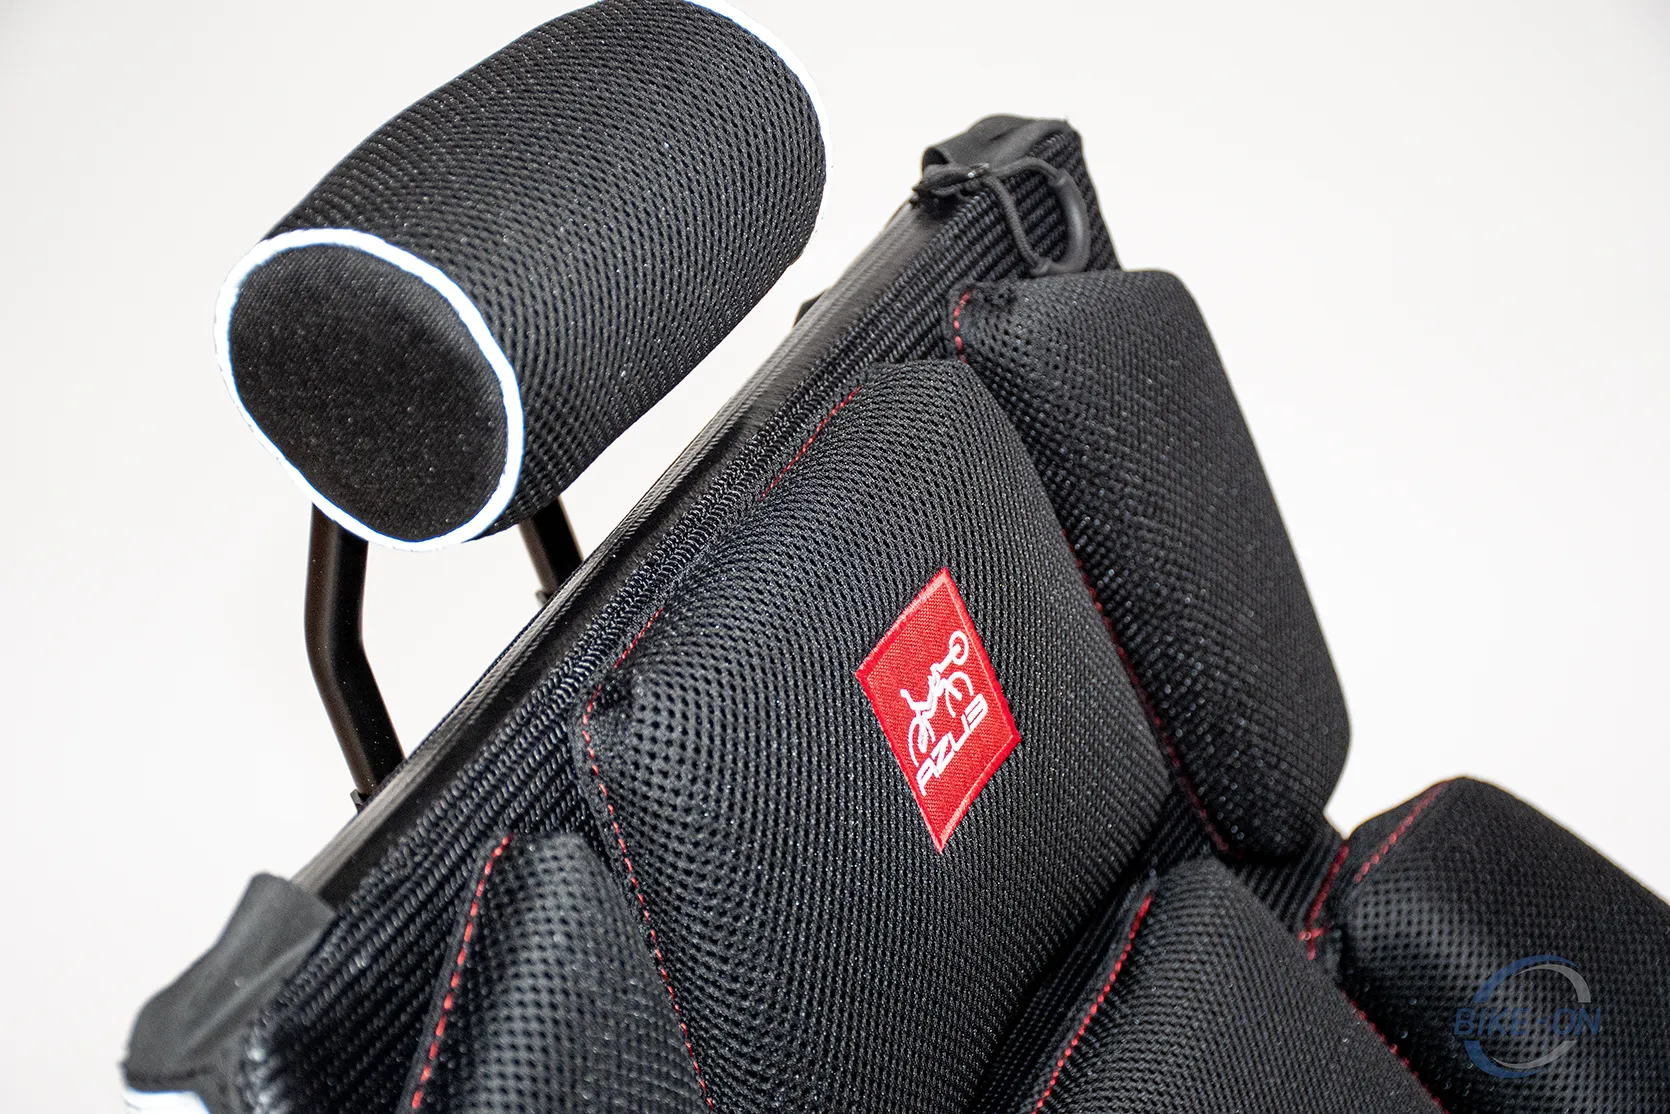 AZUB Ti-FLY 20 Black seat with red and white logo embroidered below the head rest